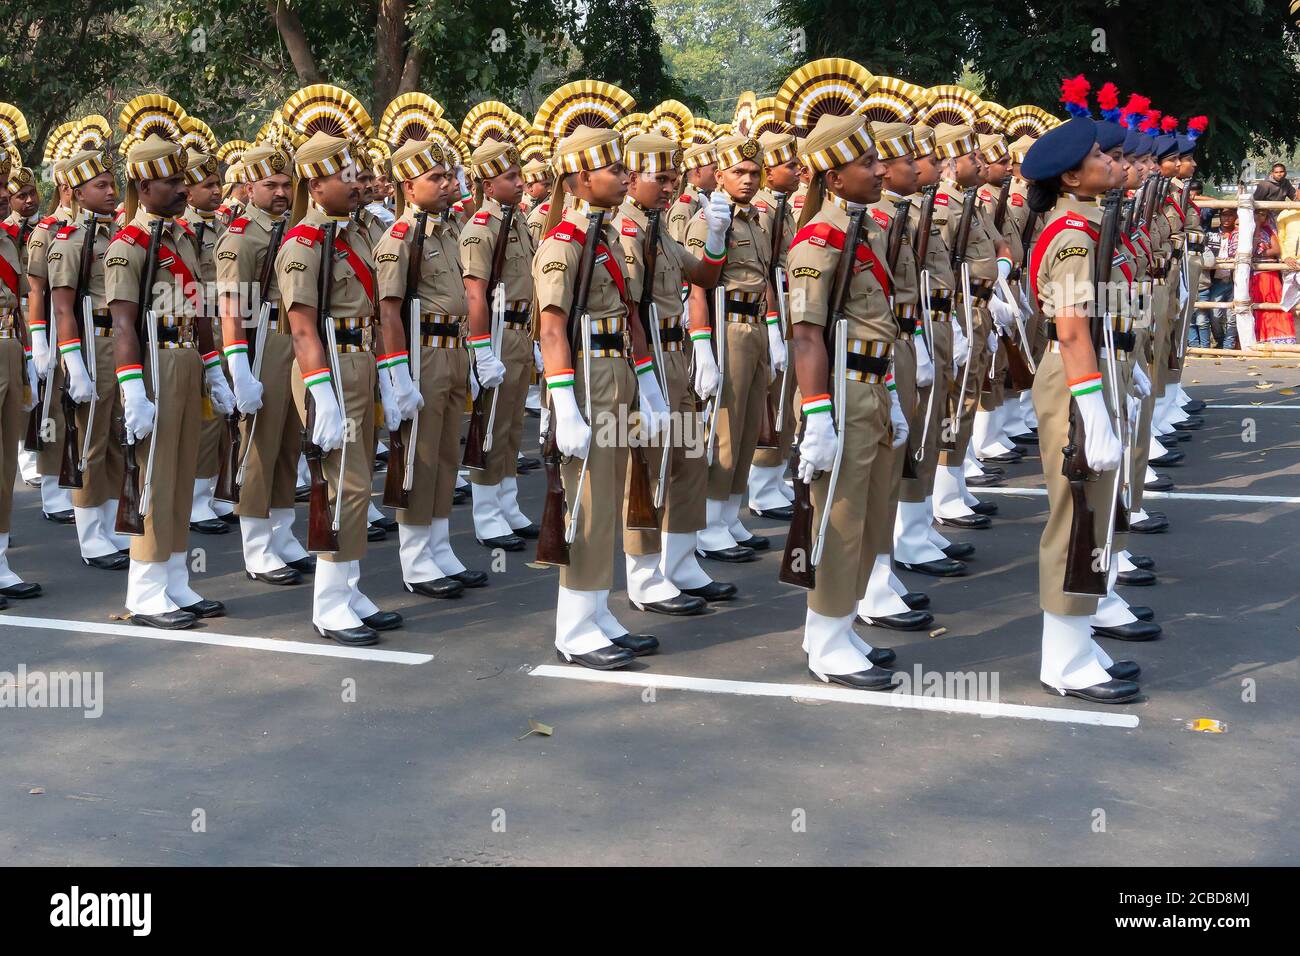 Kolkata, West Bengal, India - 26th January 2020 : India's Central Social Welfare Board (CSWB) cadets are marching past in khaki dress and hats. Stock Photo